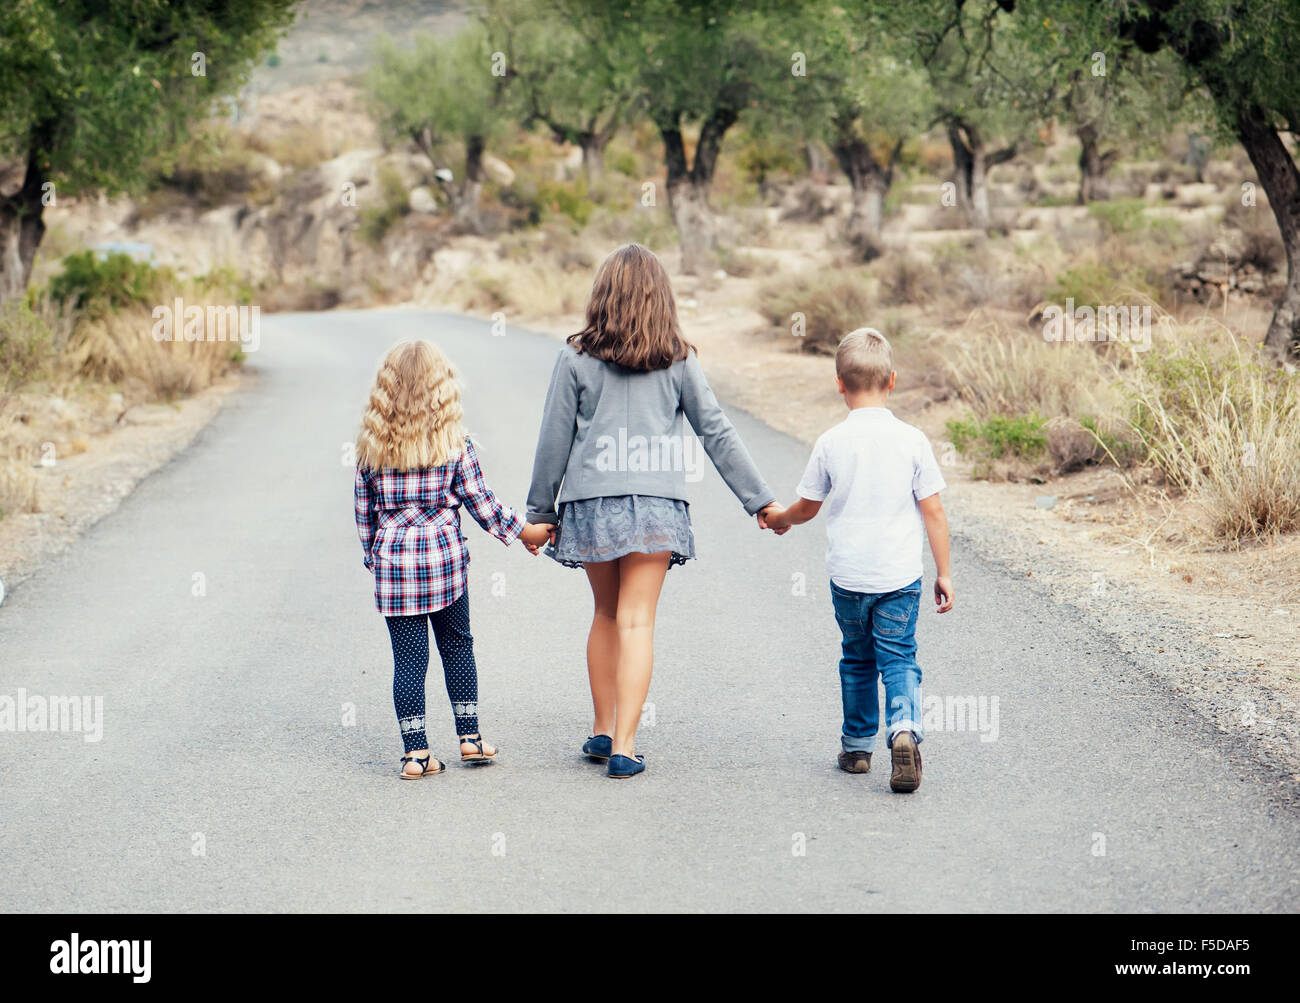 Three young children are on the road Stock Photo